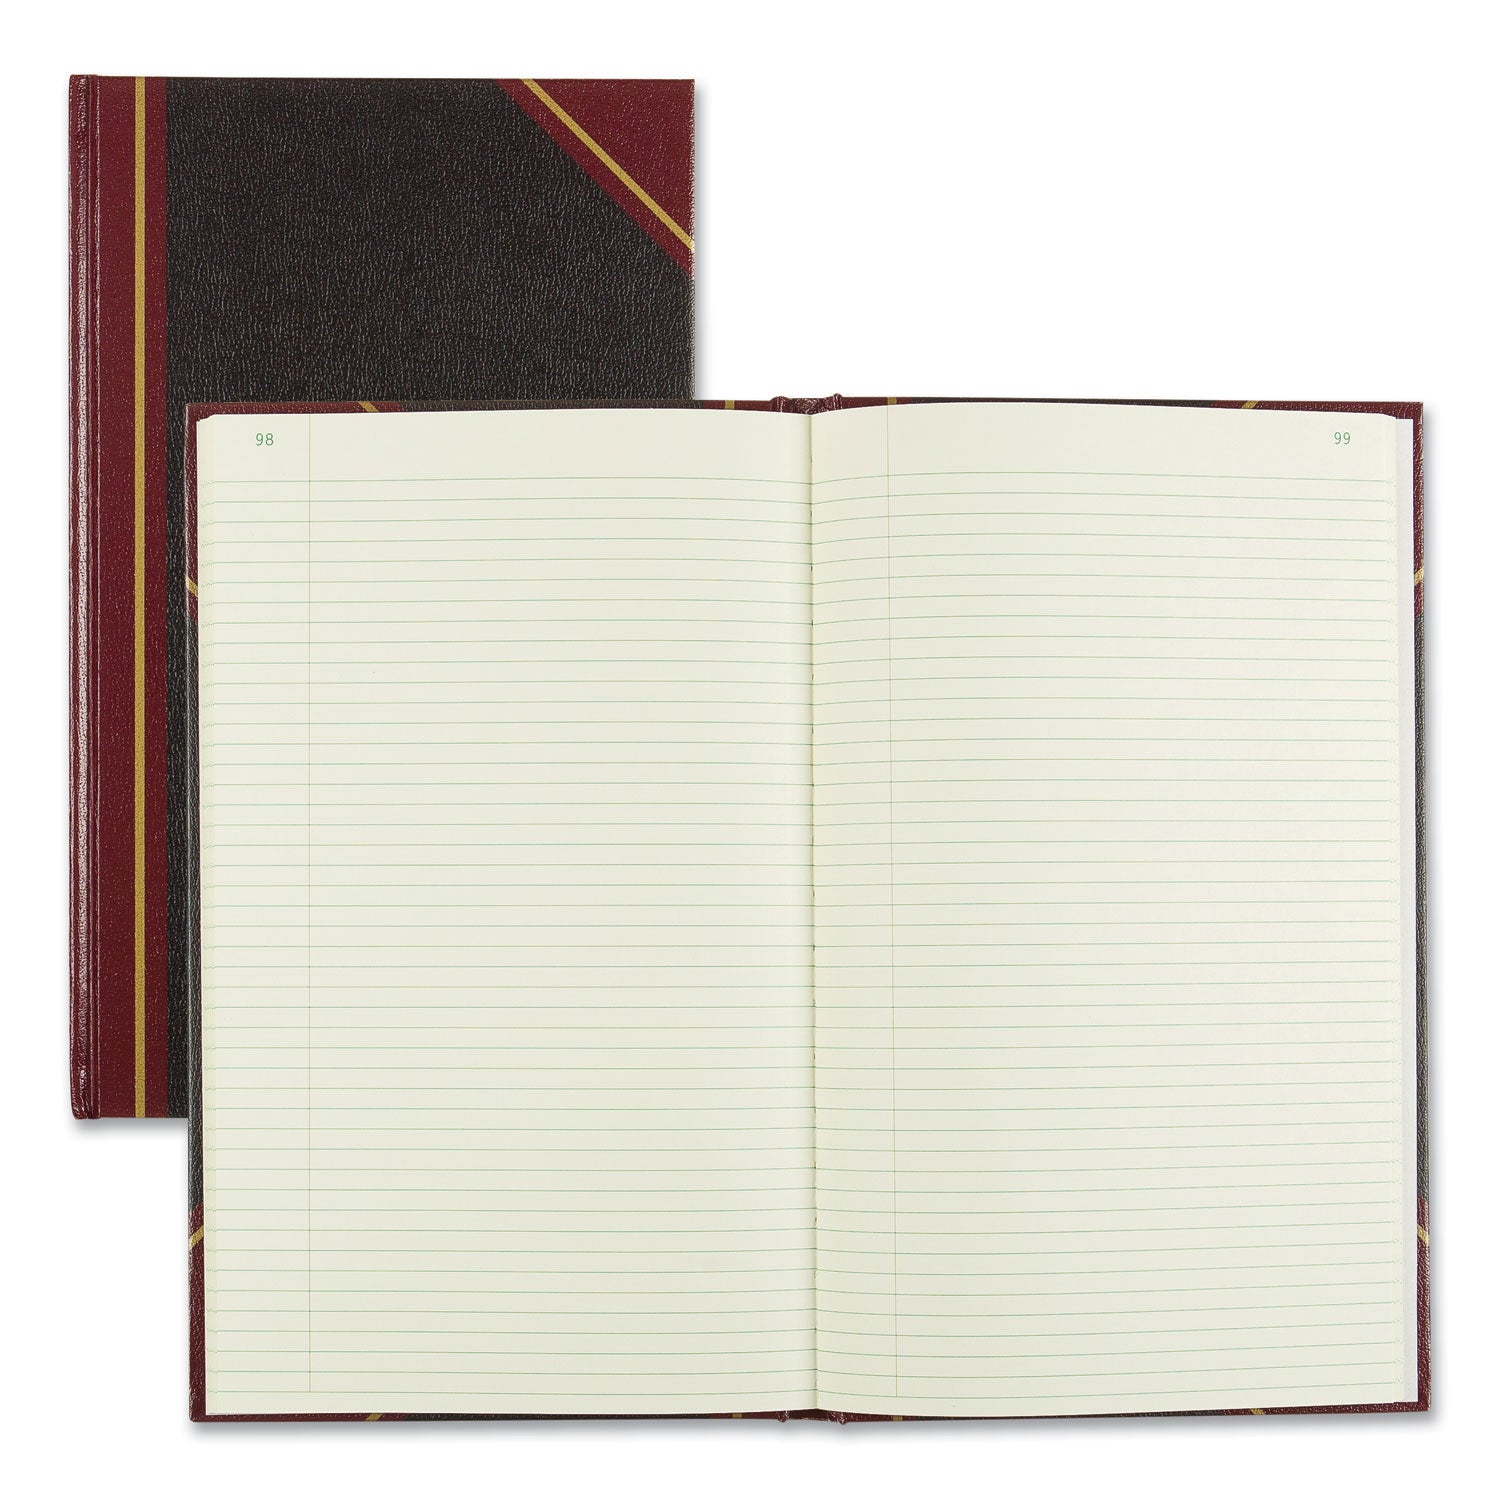 Texthide Eye-Ease Record Book, Black/Burgundy/Gold Cover, 14.25 x 8.75 Sheets, 300 Sheets/Book - 